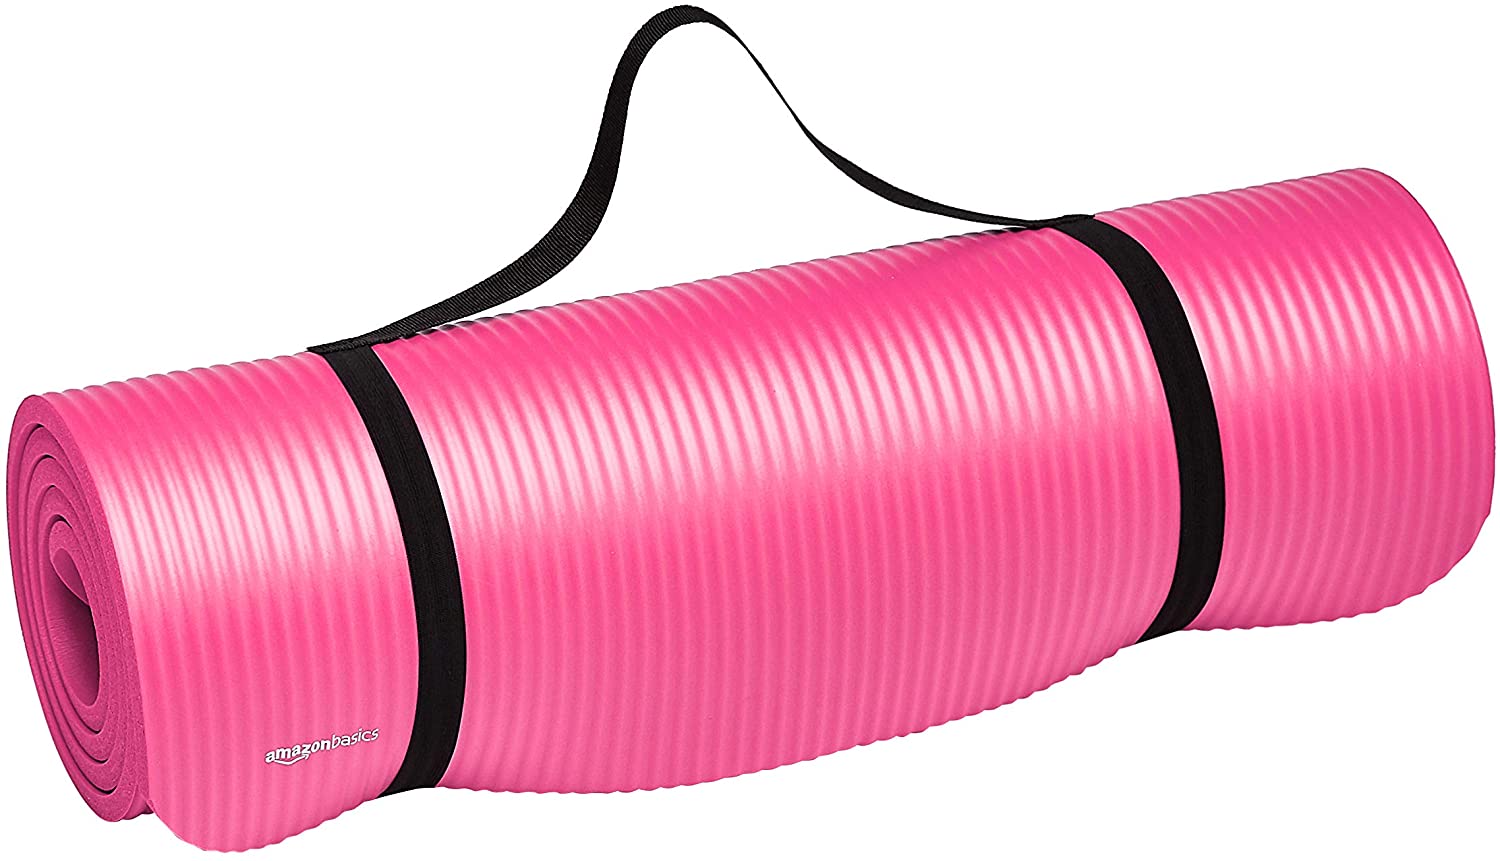 A pink exercise mat rolled up with a handle